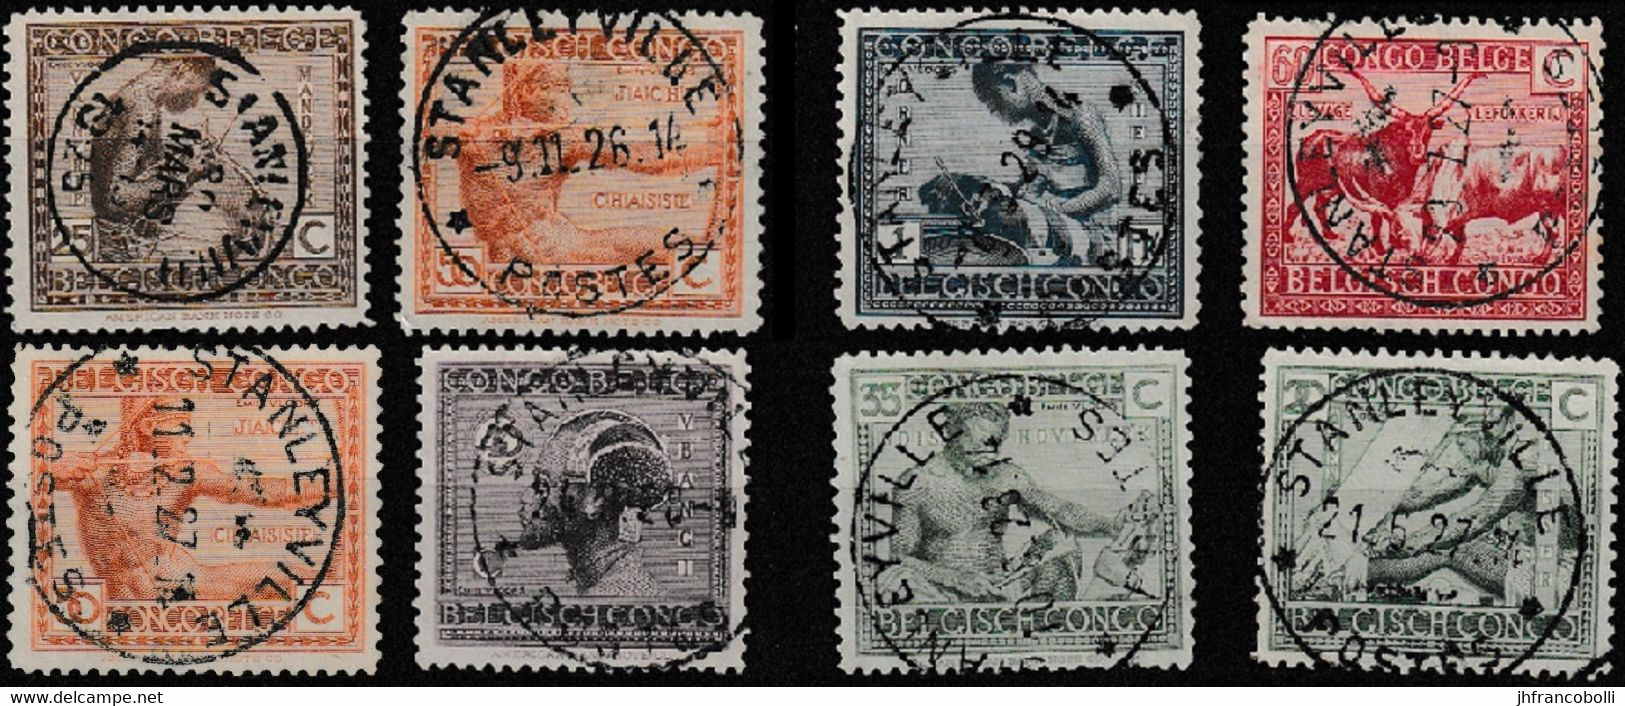 (°) CONGO BELGE / BELGIAN CONGO STANLEYVILLE CANCELATION ON [ VLOORS -1+2- ] 8 STAMPS WITH ROUND CANCELS [F] - Variedades Y Curiosidades